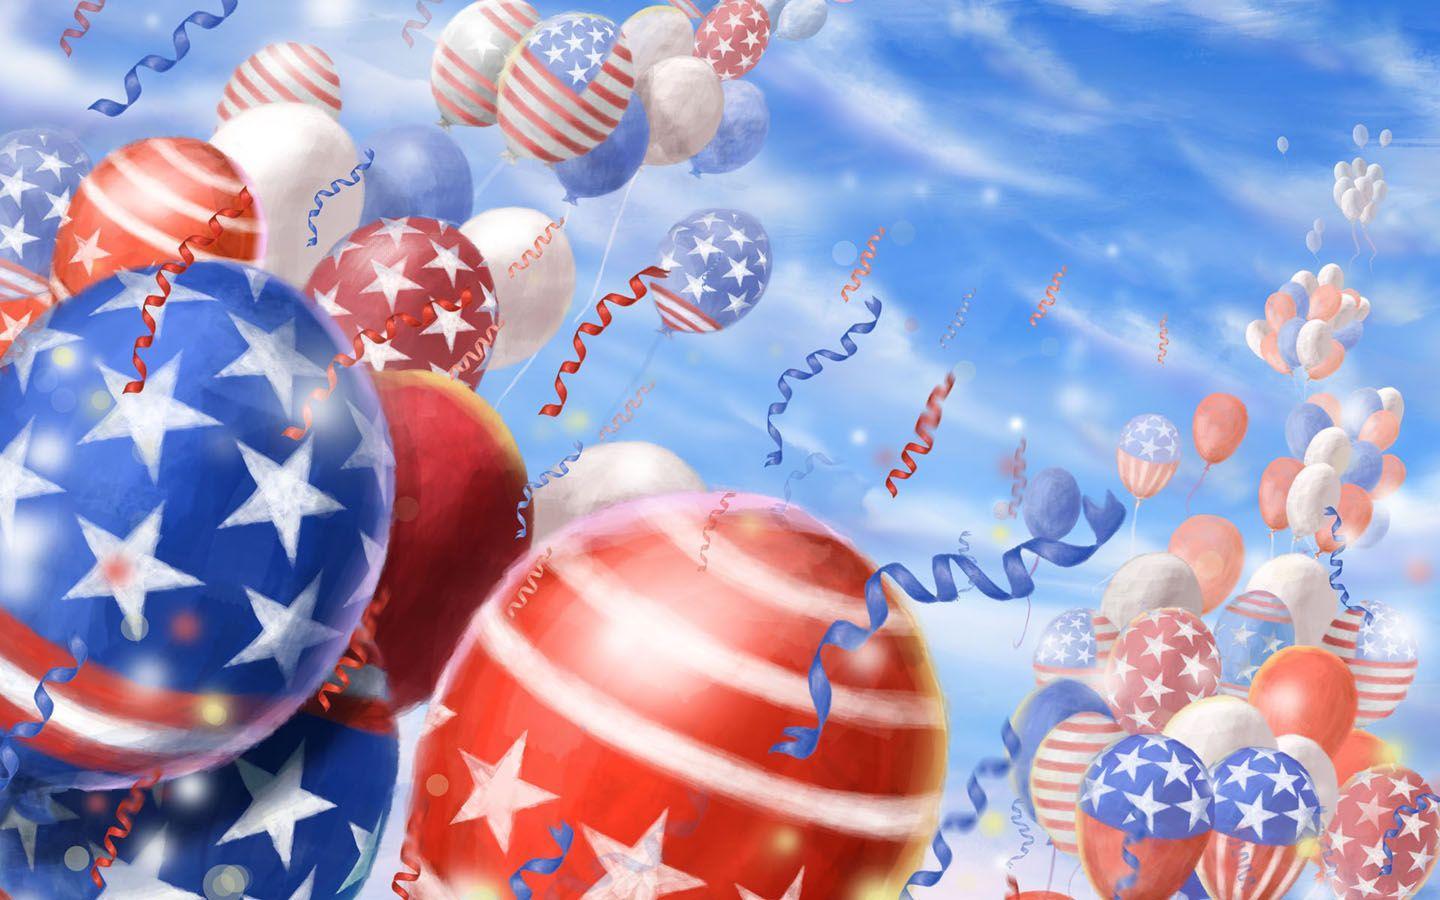 USA Independence Day Celebration Wallpaper. Live HD Wallpaper HQ